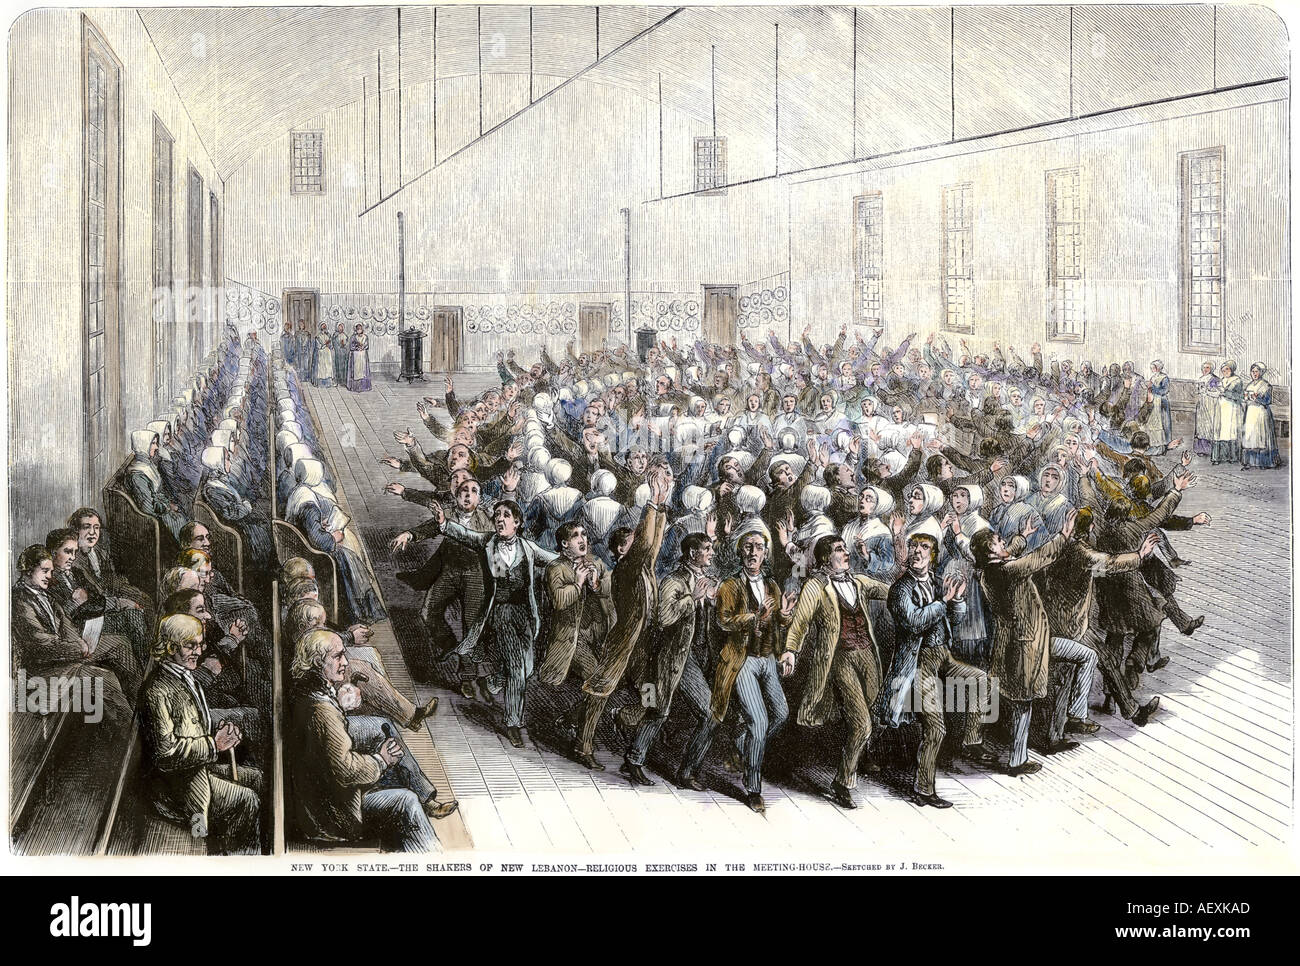 Shaker religious exercises in the meeting house New Lebanon New York 1870s. Hand-colored woodcut Stock Photo